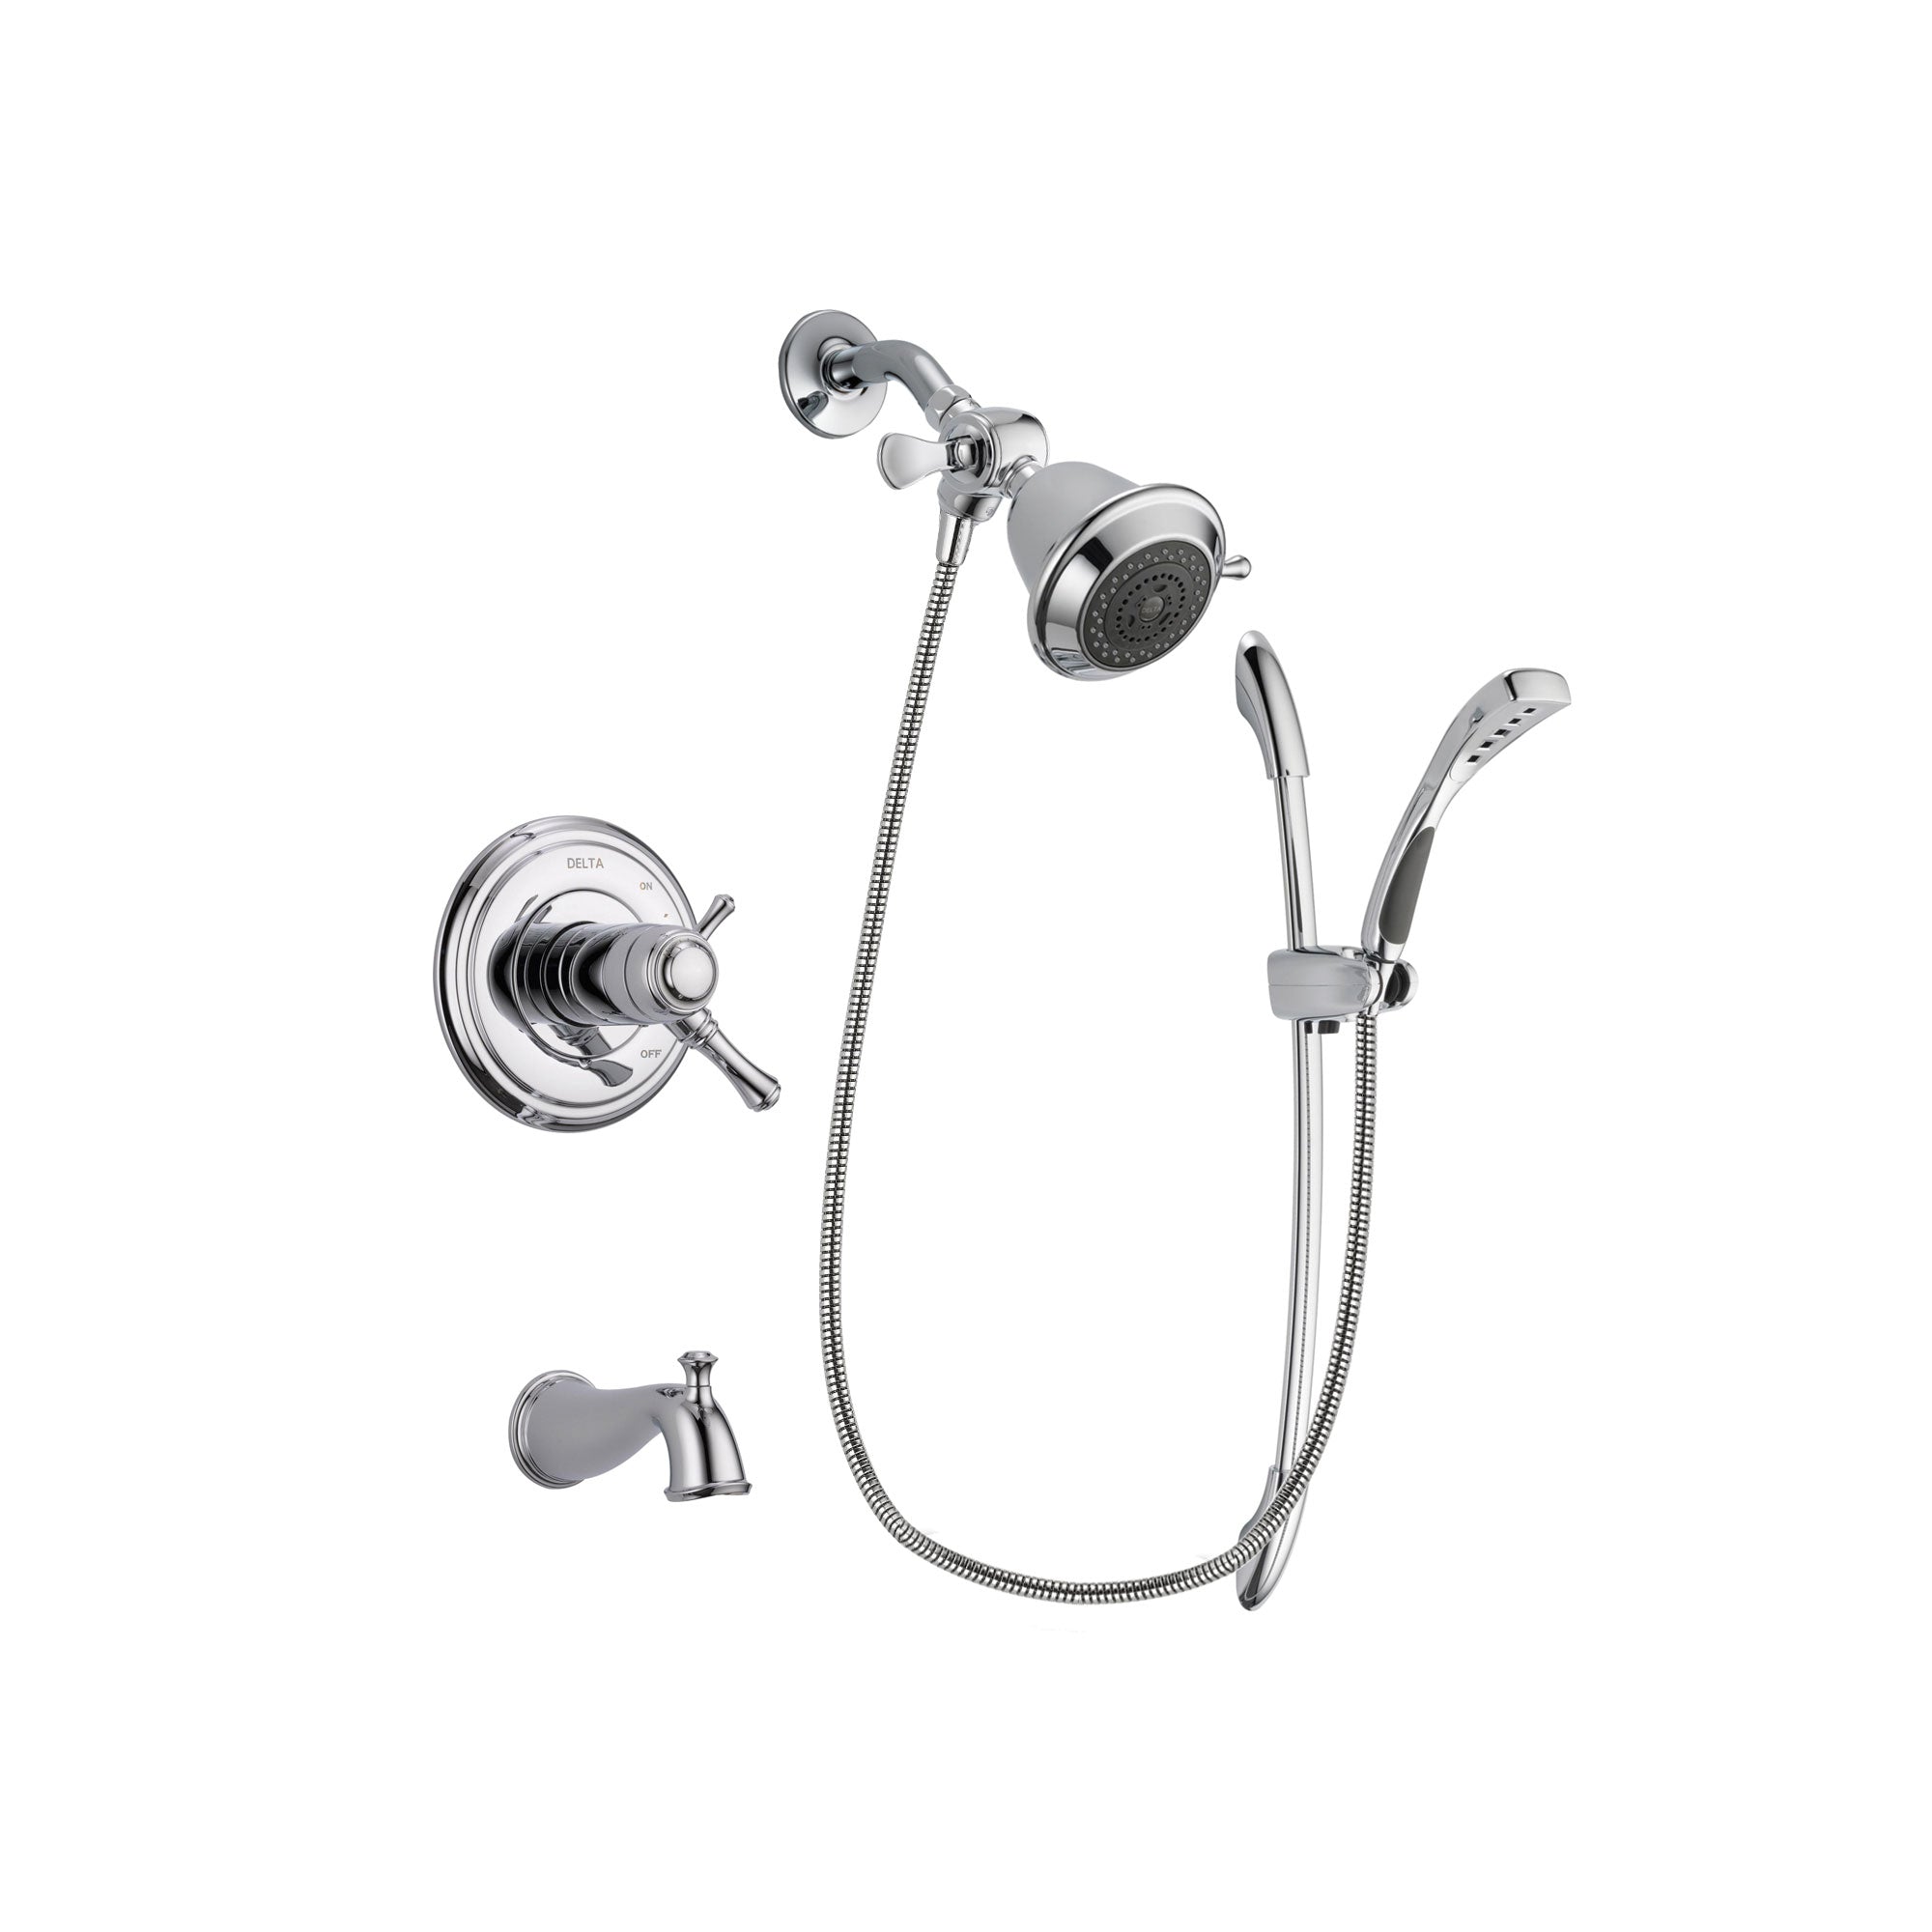 Delta Cassidy Chrome Finish Thermostatic Tub and Shower Faucet System Package with Shower Head and Handheld Shower with Slide Bar Includes Rough-in Valve and Tub Spout DSP0433V